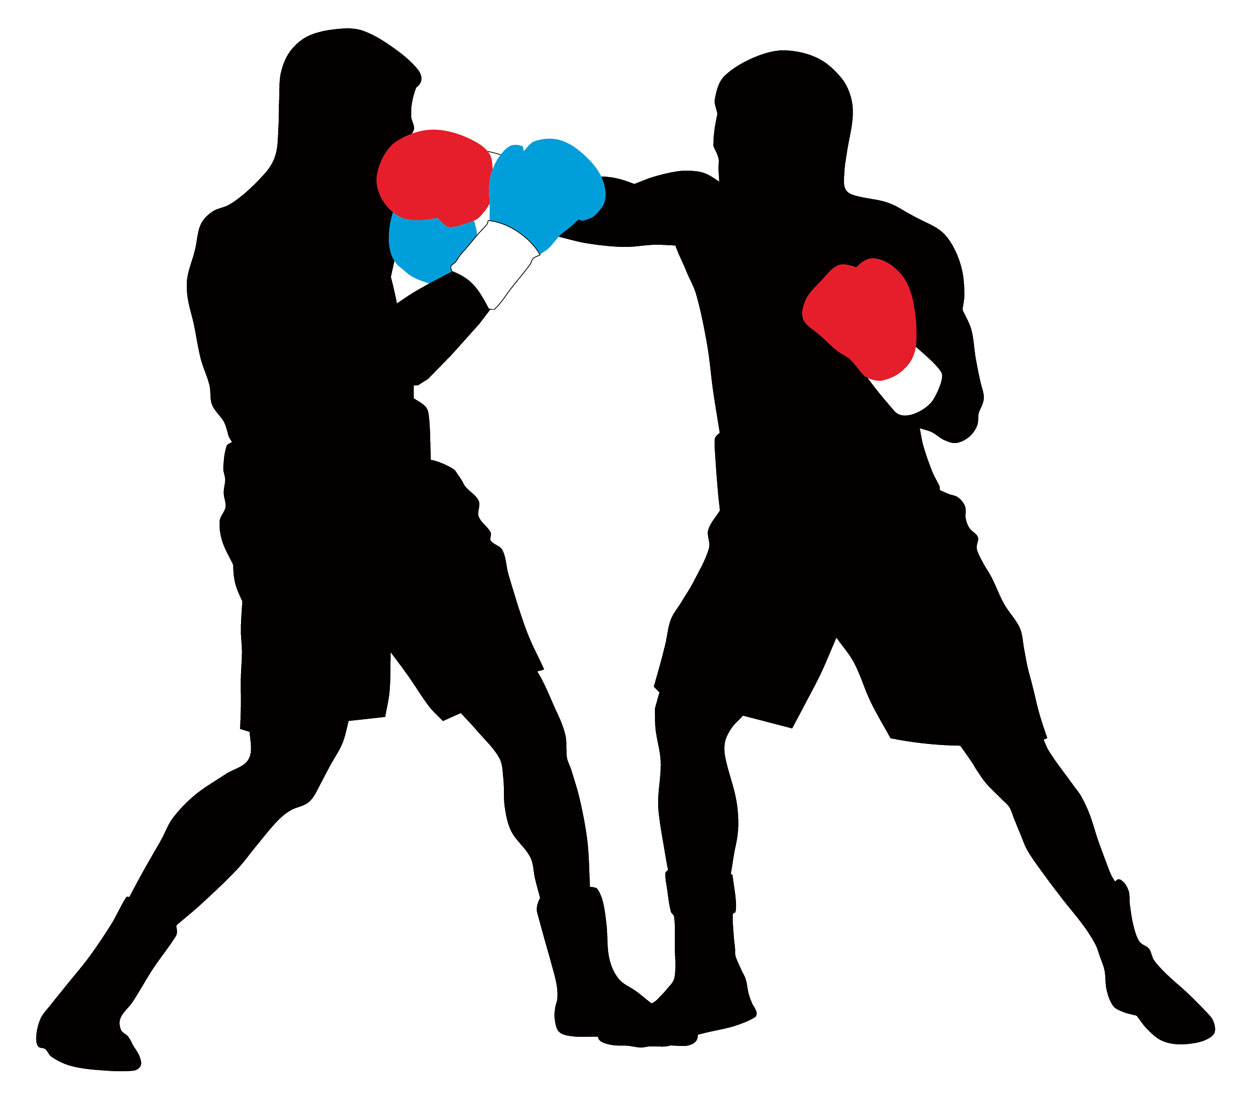 Free Boxing Silhouette Free Cliparts That You Can Download To You